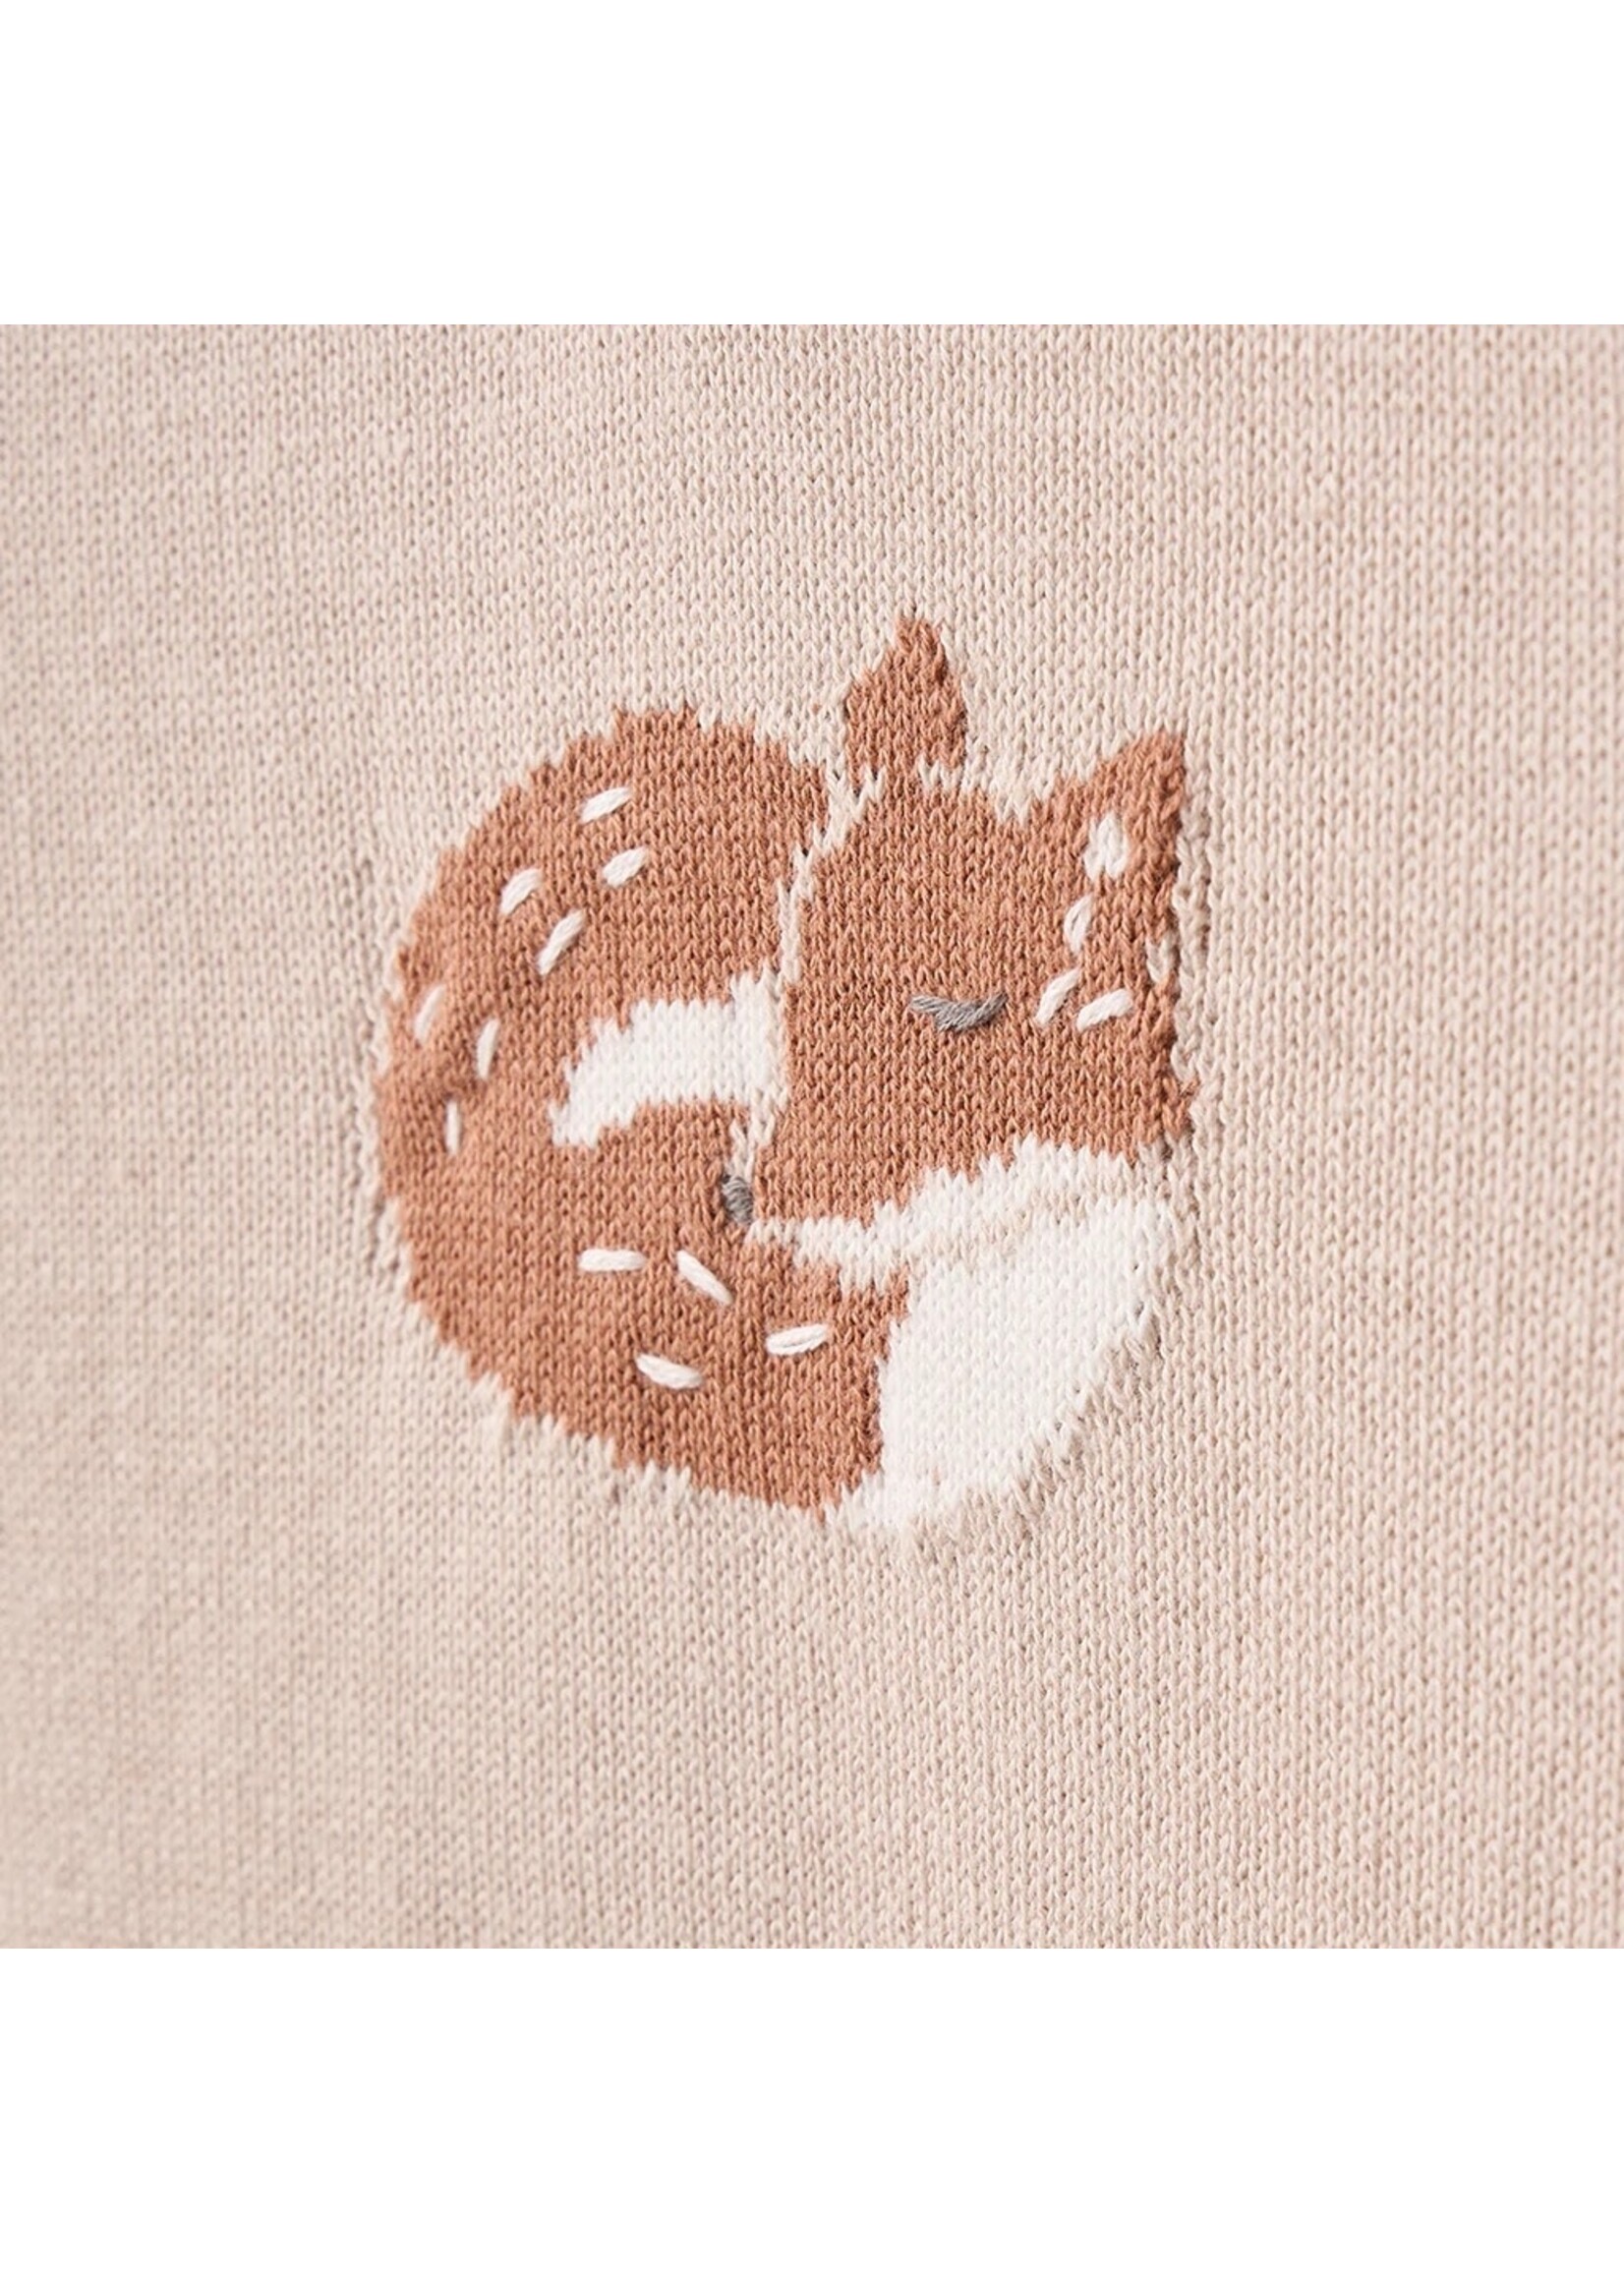 Knit Jumpsuit Footed Fox